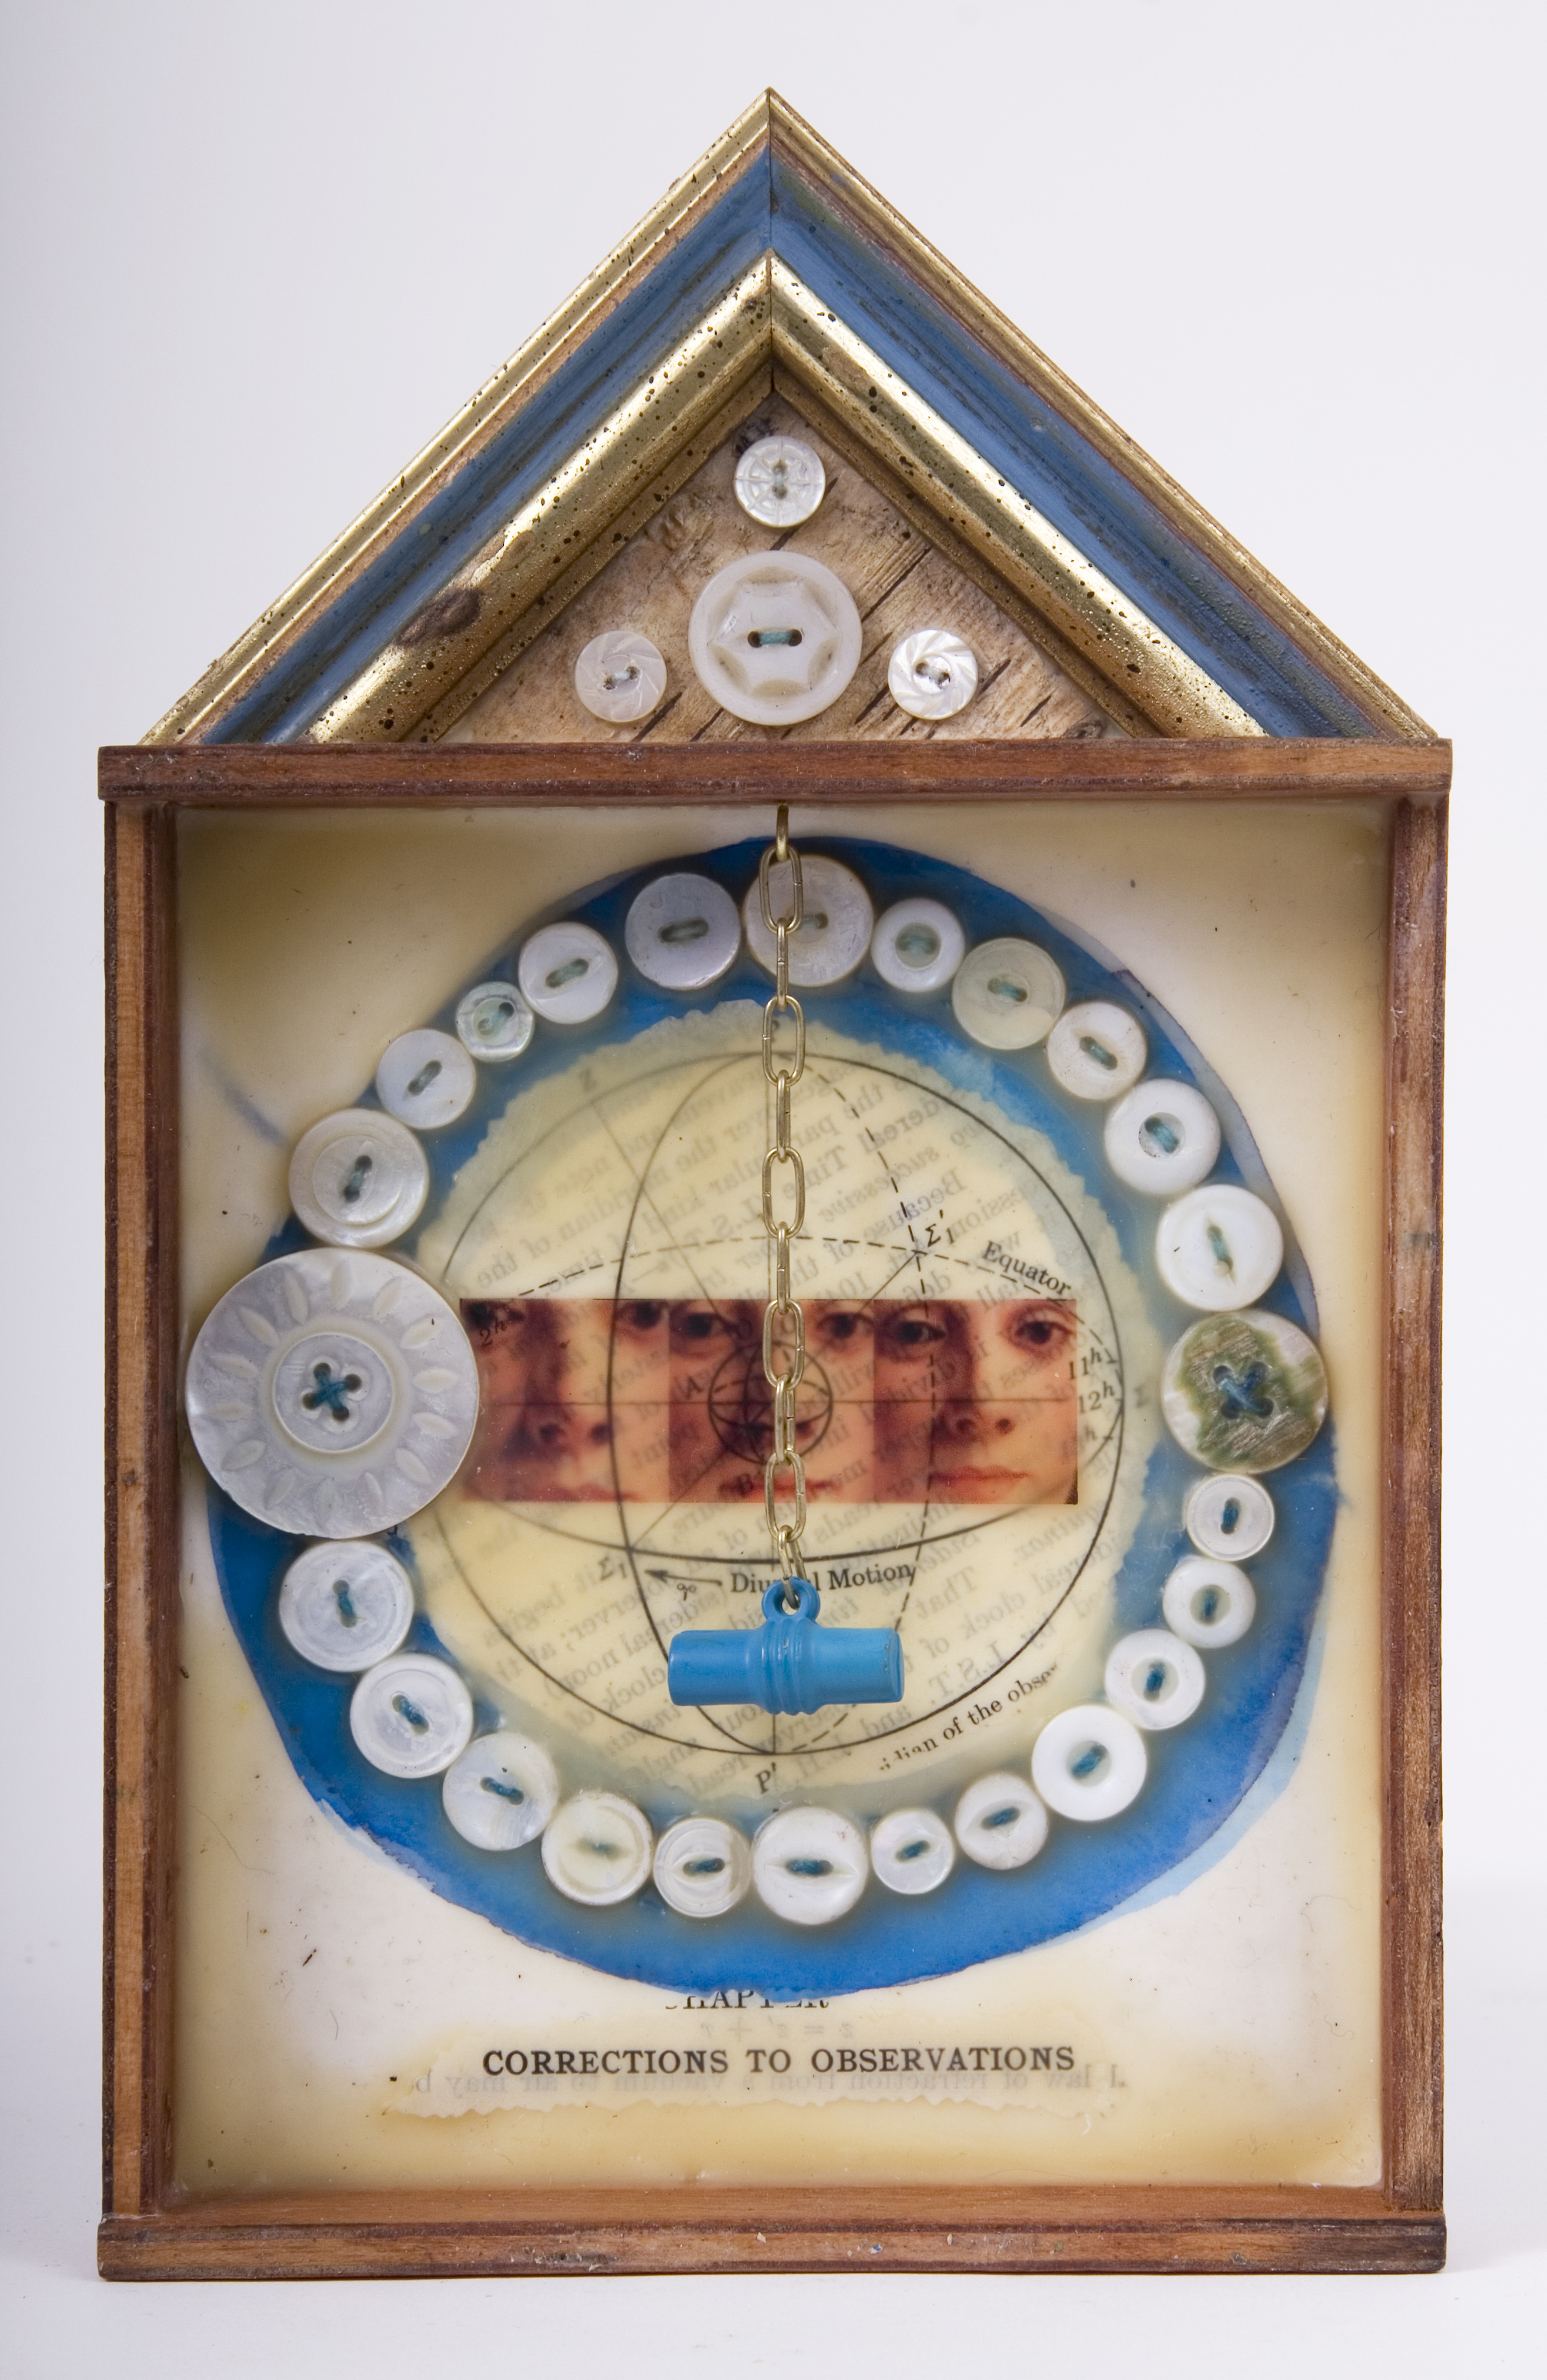    \"Corrections to Observations\"
    mixed-media assemblage
    9 x 5.5 x 1.25
    2009
    $75.00
    Cigar box, frame sample, birch bark, mother of pearl buttons,  chain, plastic blue button,transparency, ink, wax, astronomy text on watercolor paper